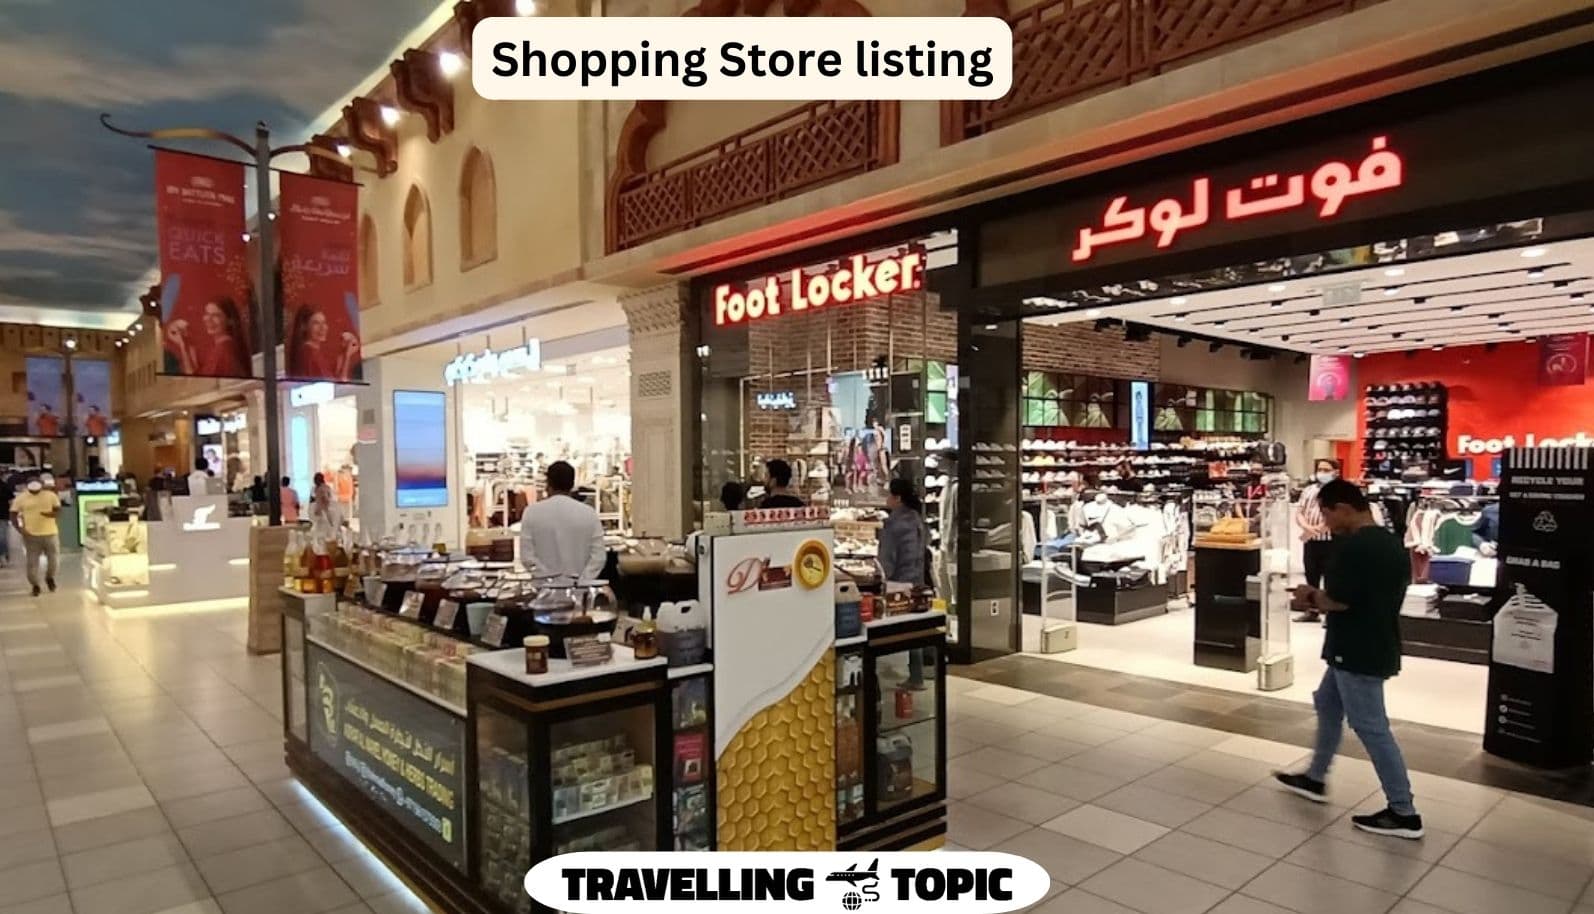 Shopping Store listing